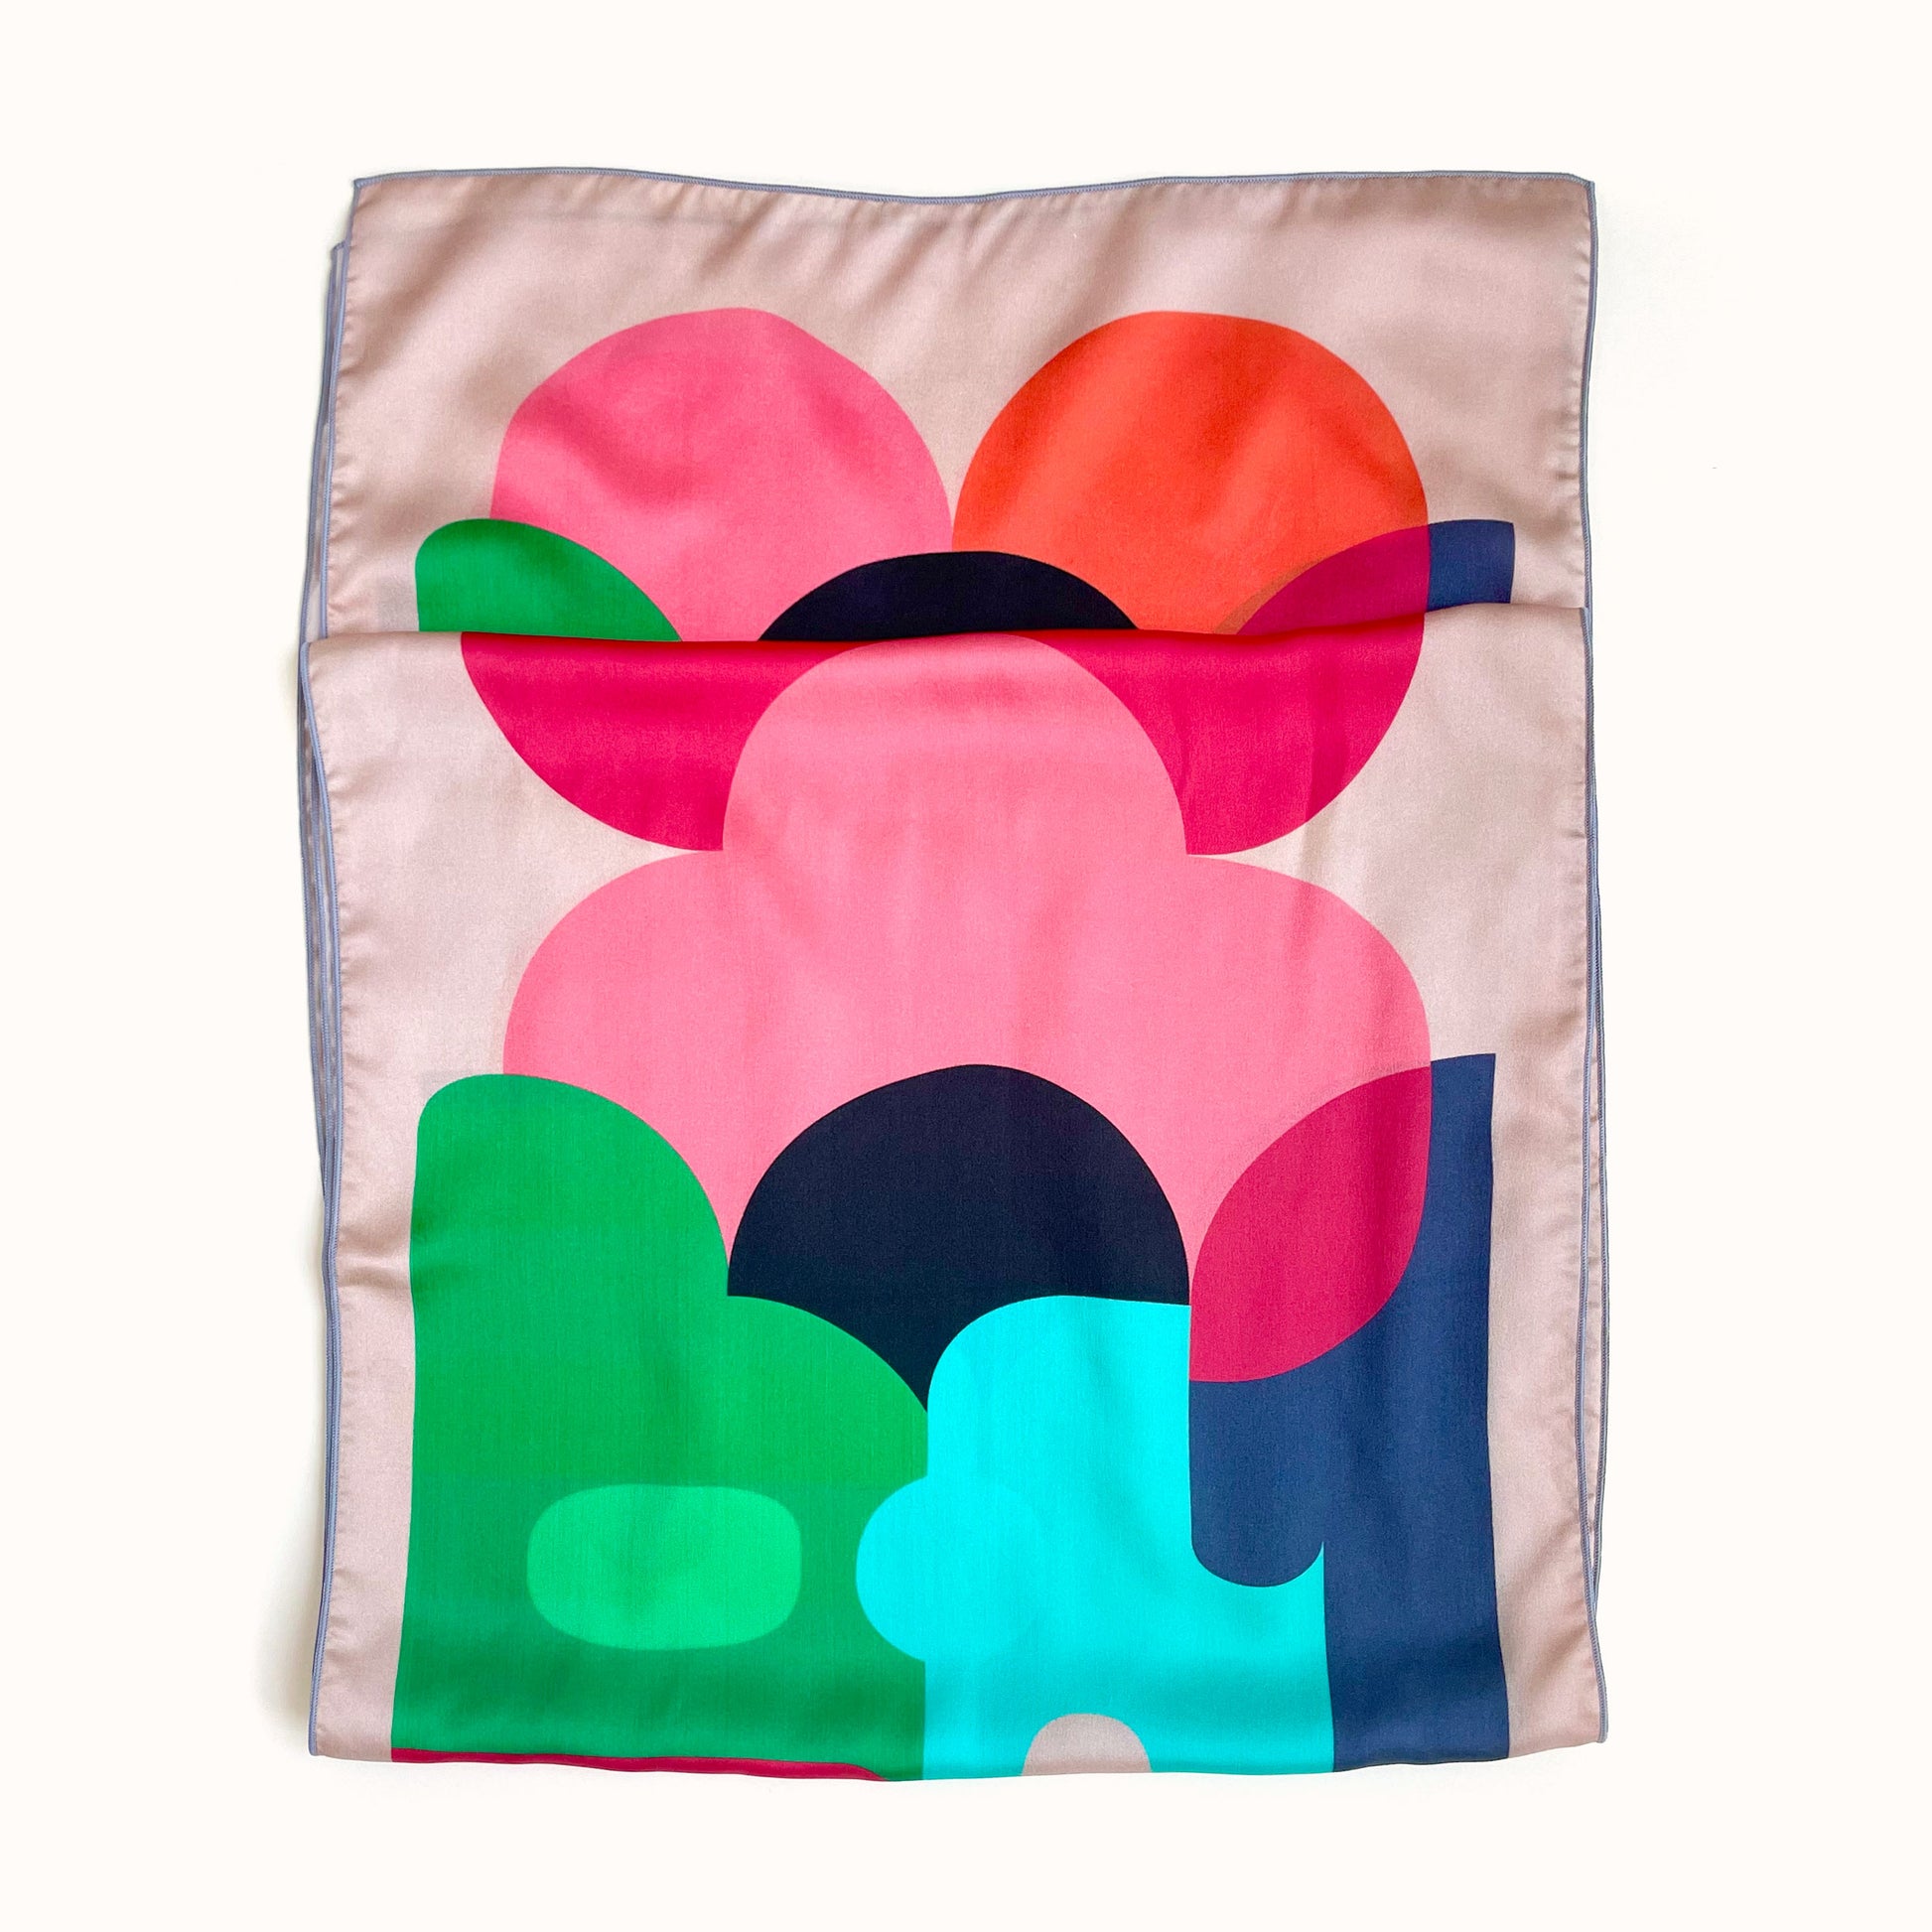 Luxury silk scarf inspired by 1960s style. Bold colors make this a perfect match with any outfit. Wear as a neckerchief or hair wrap to elevate your outfit, try dopamine dressing.